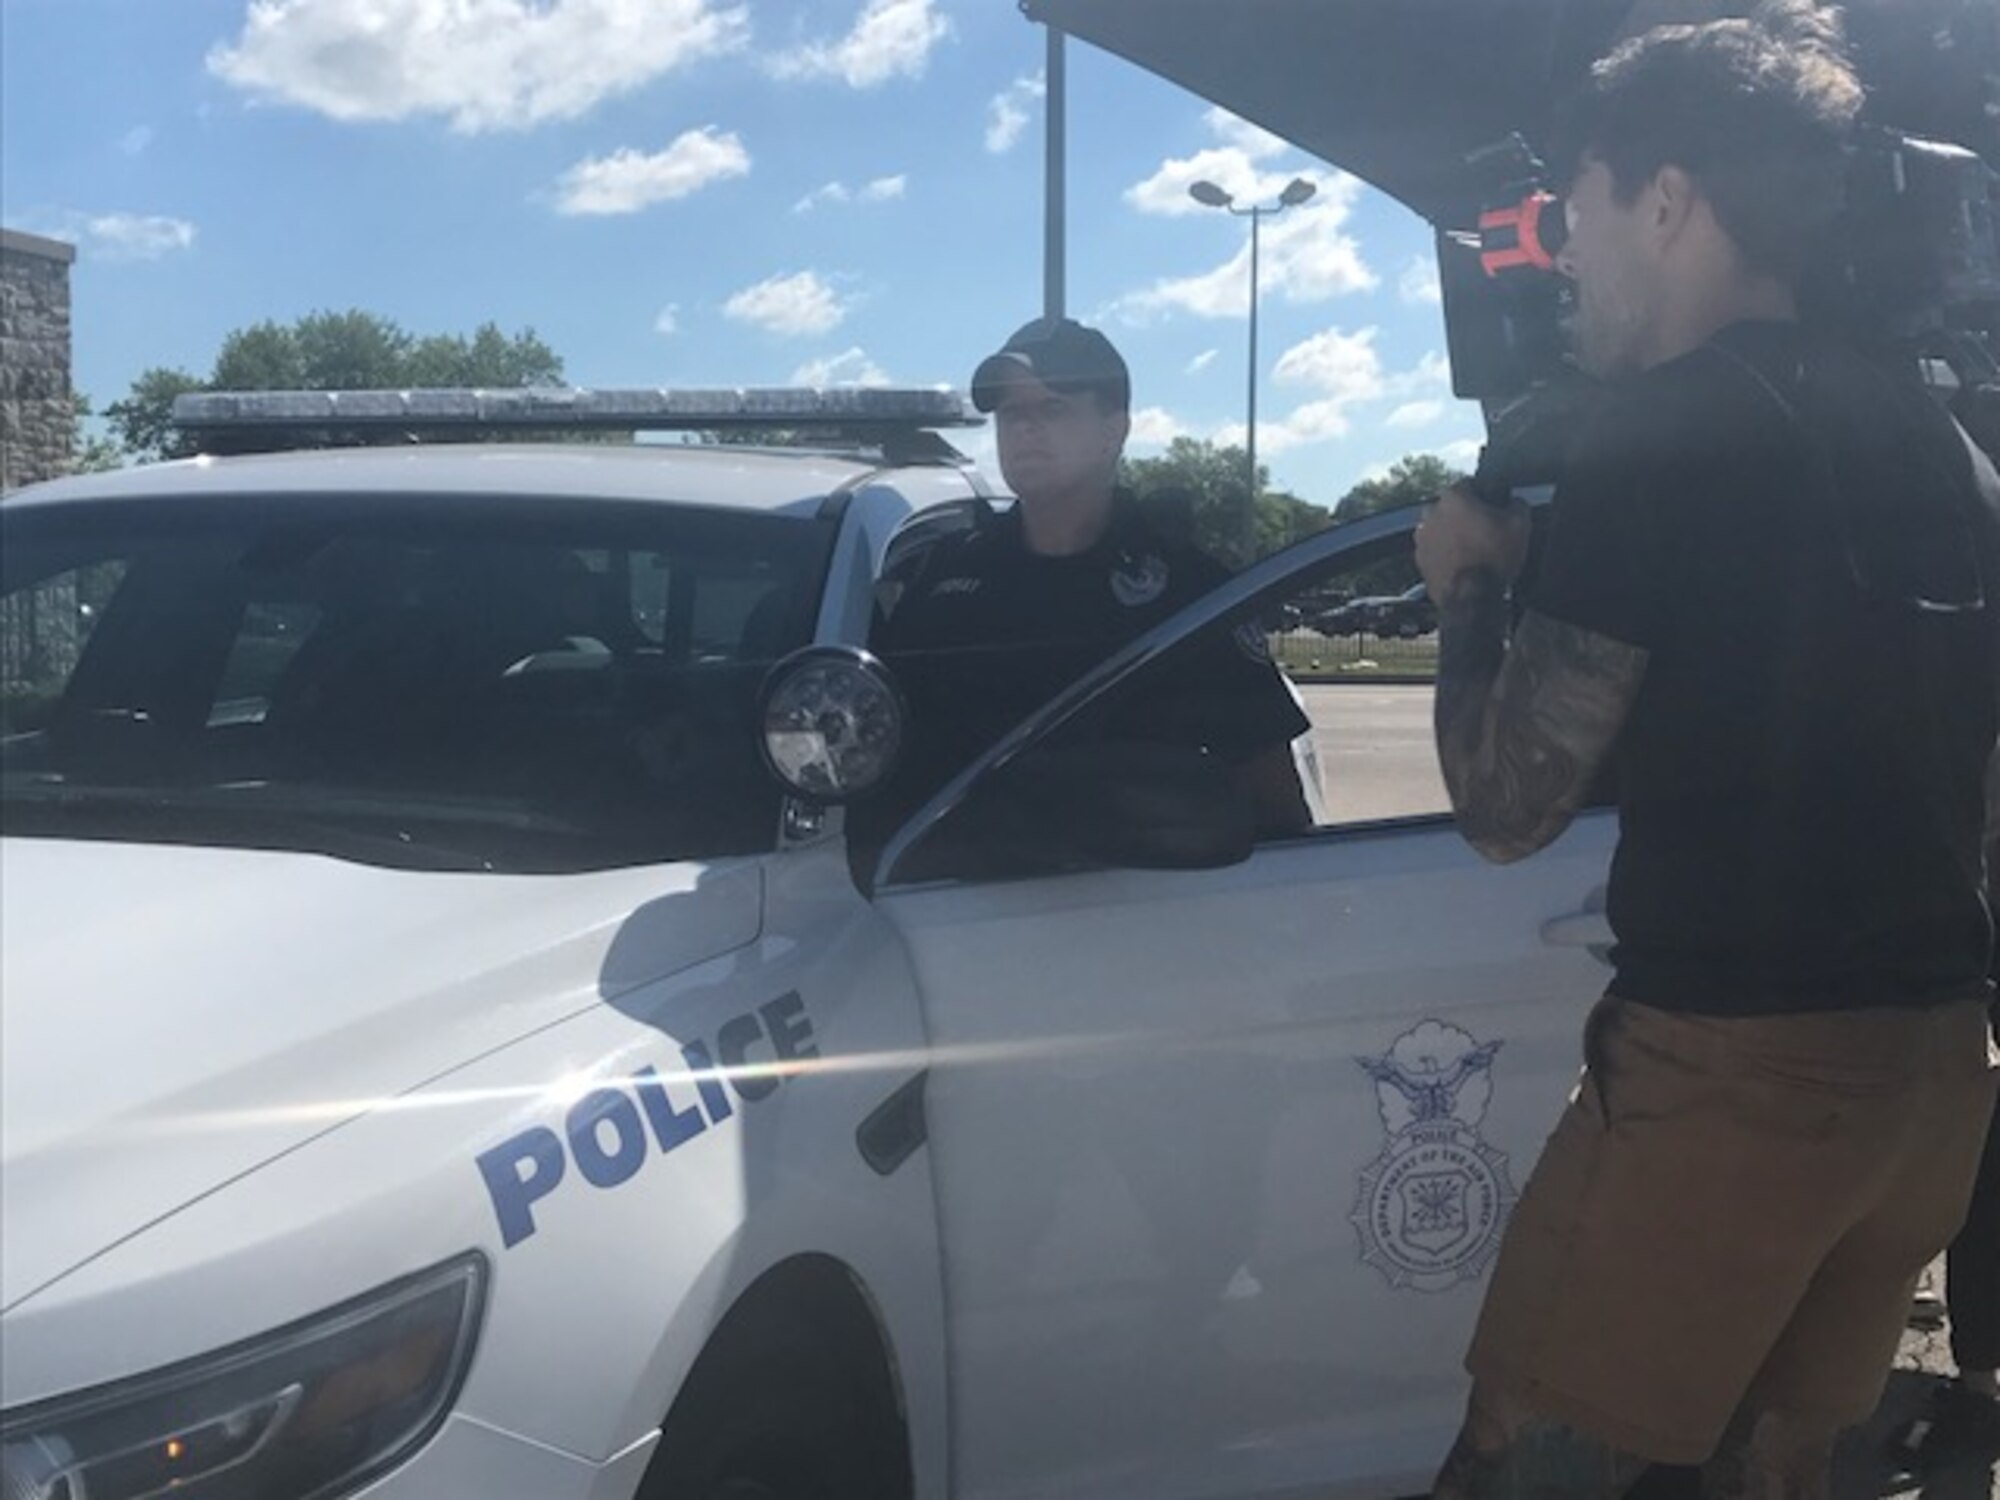 Stephanie Cordray, 88th Security Forces Squadron police officer, is filmed exiting a police vehicle for the PACE’s “Teamwork” Heritage Today video on June 6, 2017. Cordray and Ragan Weaver (not pictured) were selected to represent civilians in Security Forces and the contributions they make to the Air Force mission. (U.S. Air Force photo/Stacey Geiger)